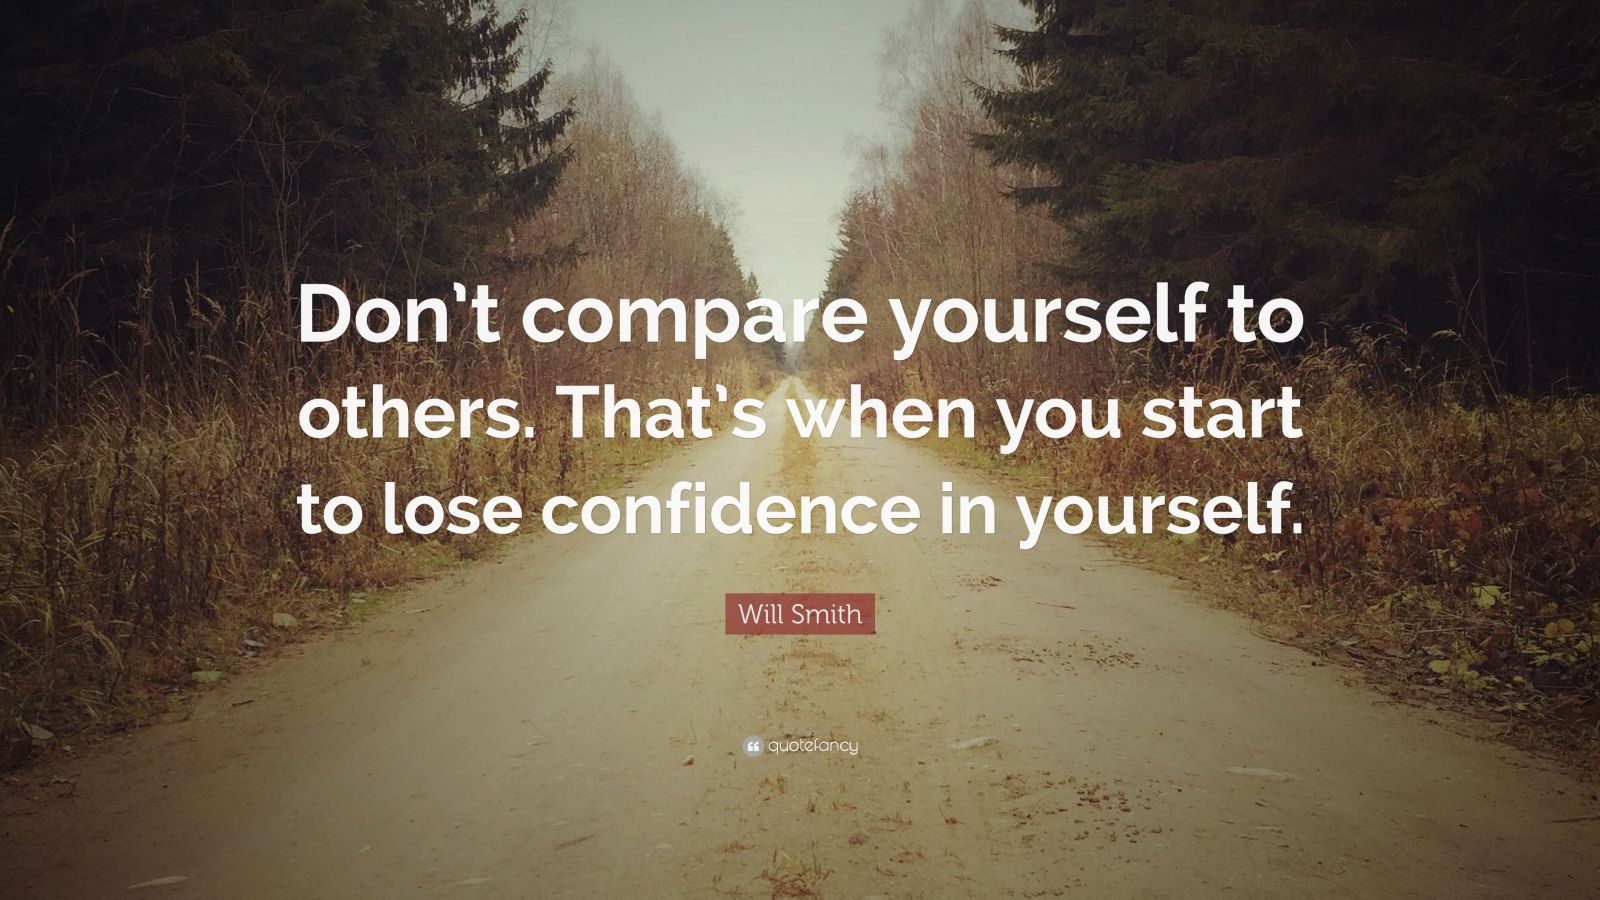 Will Smith Quote: “Don’t compare yourself to others. That’s when you